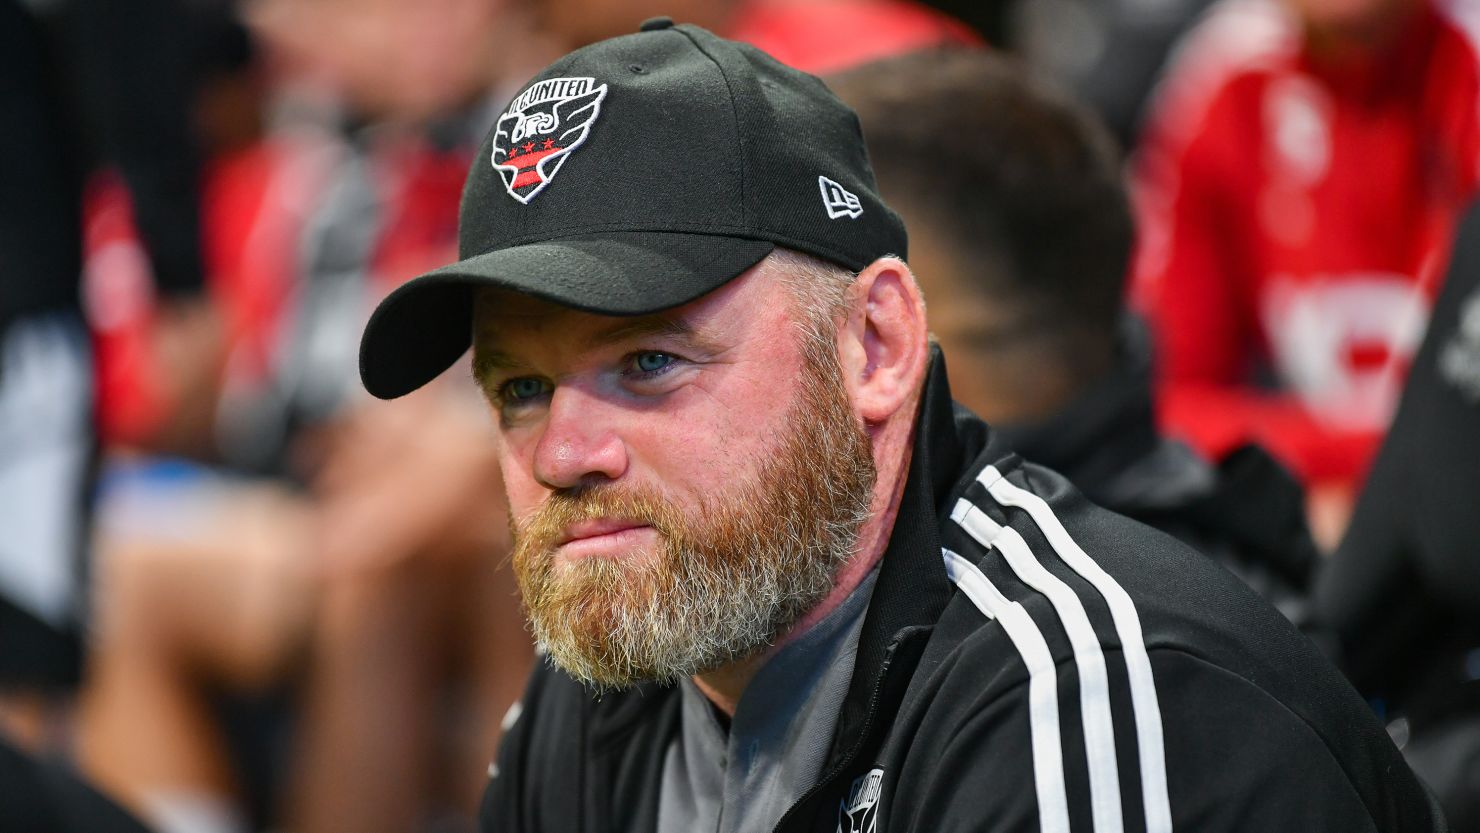 D.C. United head coach Wayne Rooney prior to the start of the MLS match between D.C. United and Atlanta United FC on August 28th, 2022 at Mercedes-Benz Stadium in Atlanta, GA.